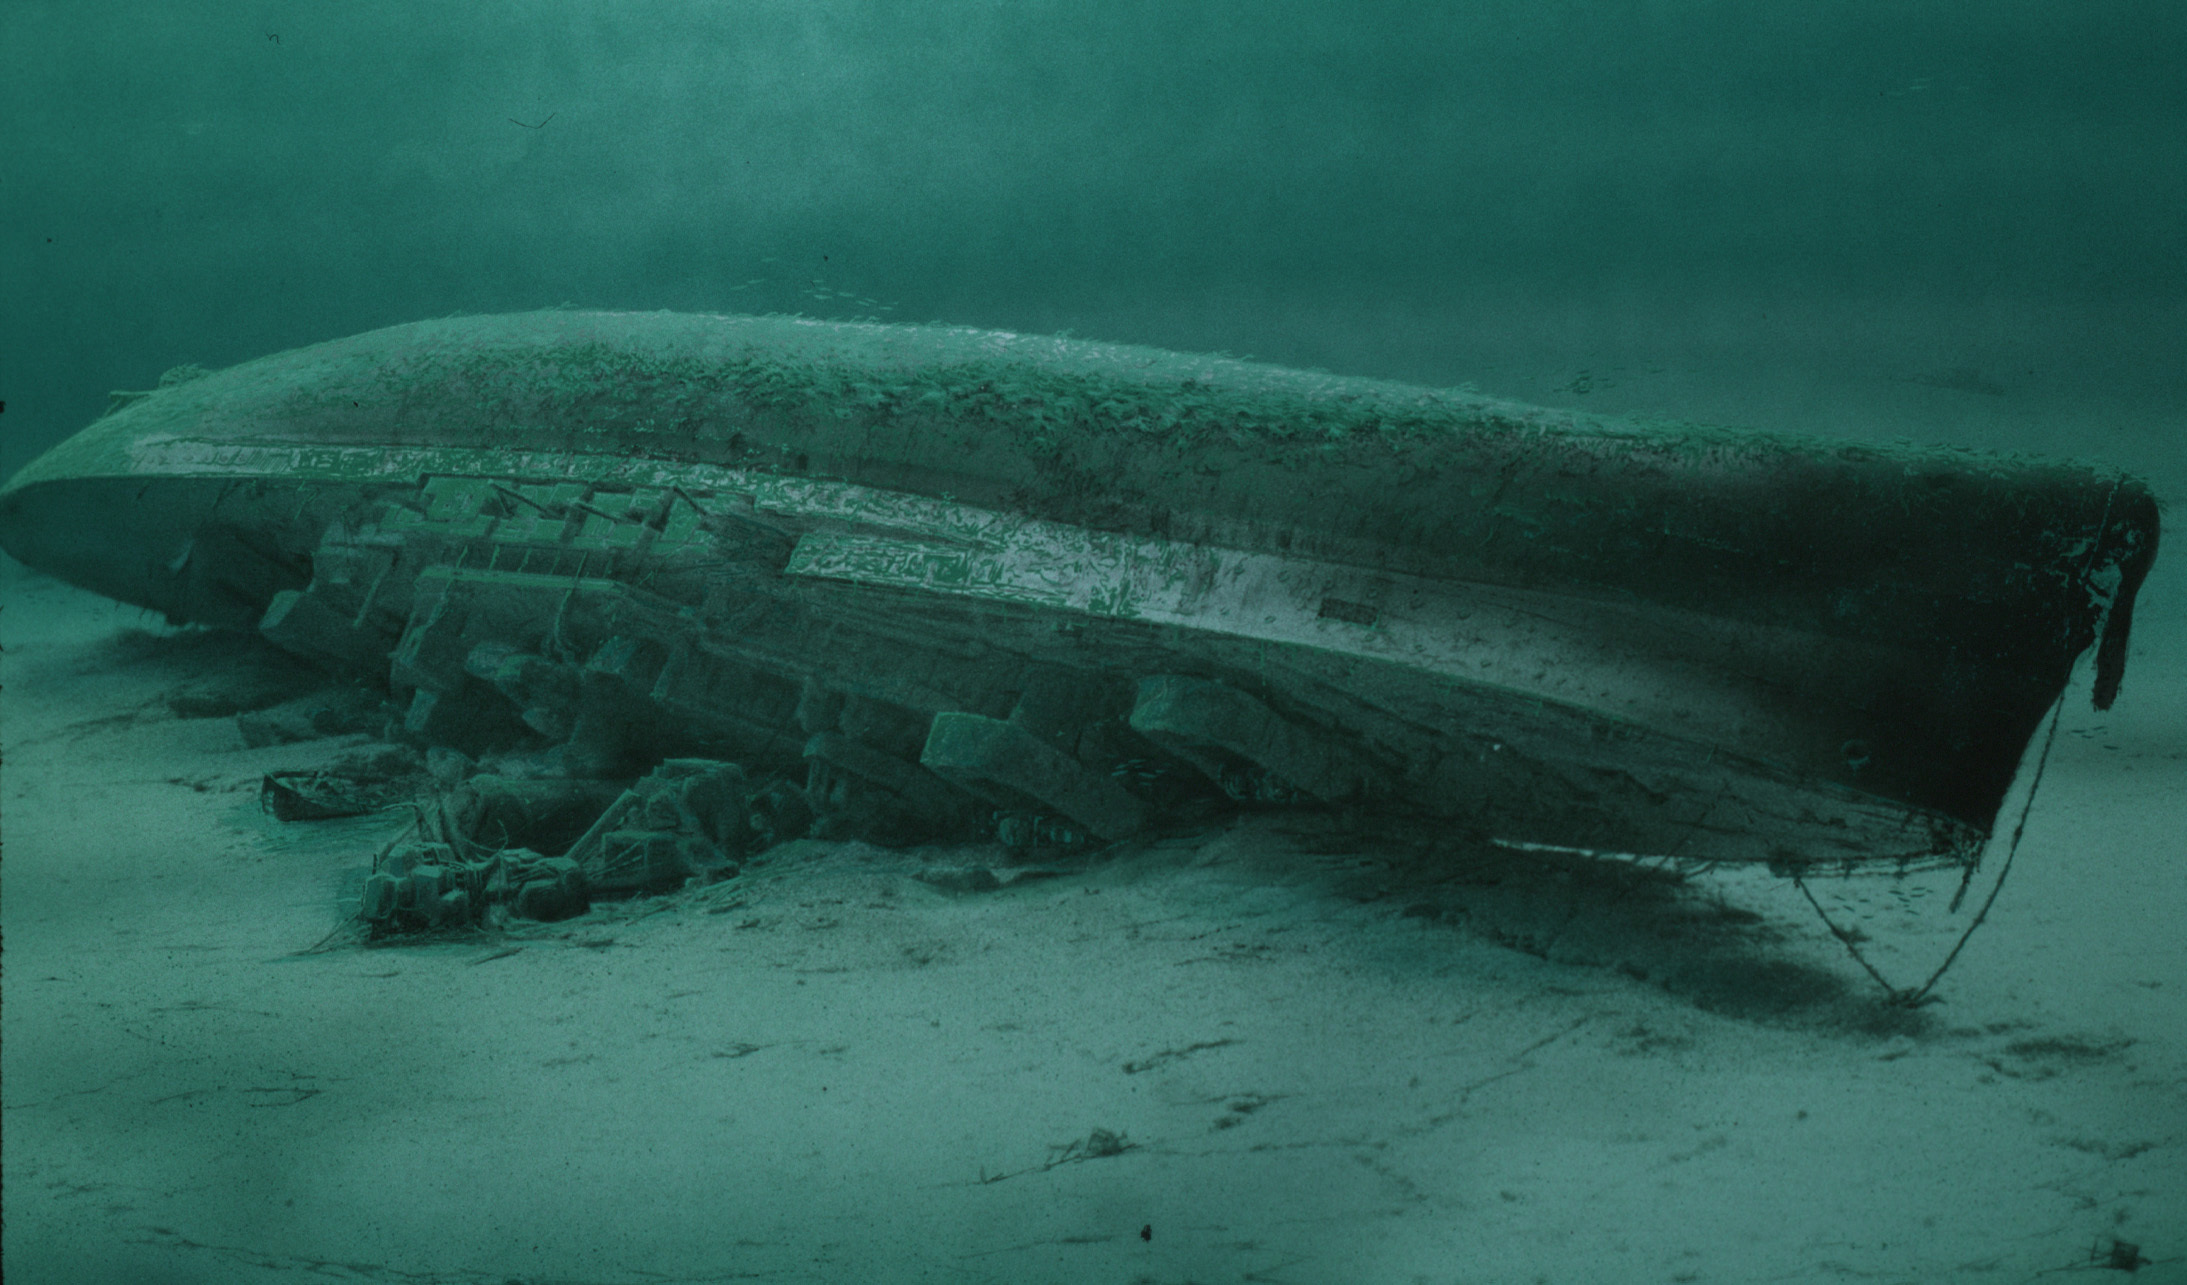 HMS Royal Oak on the Scapa Flow seabed